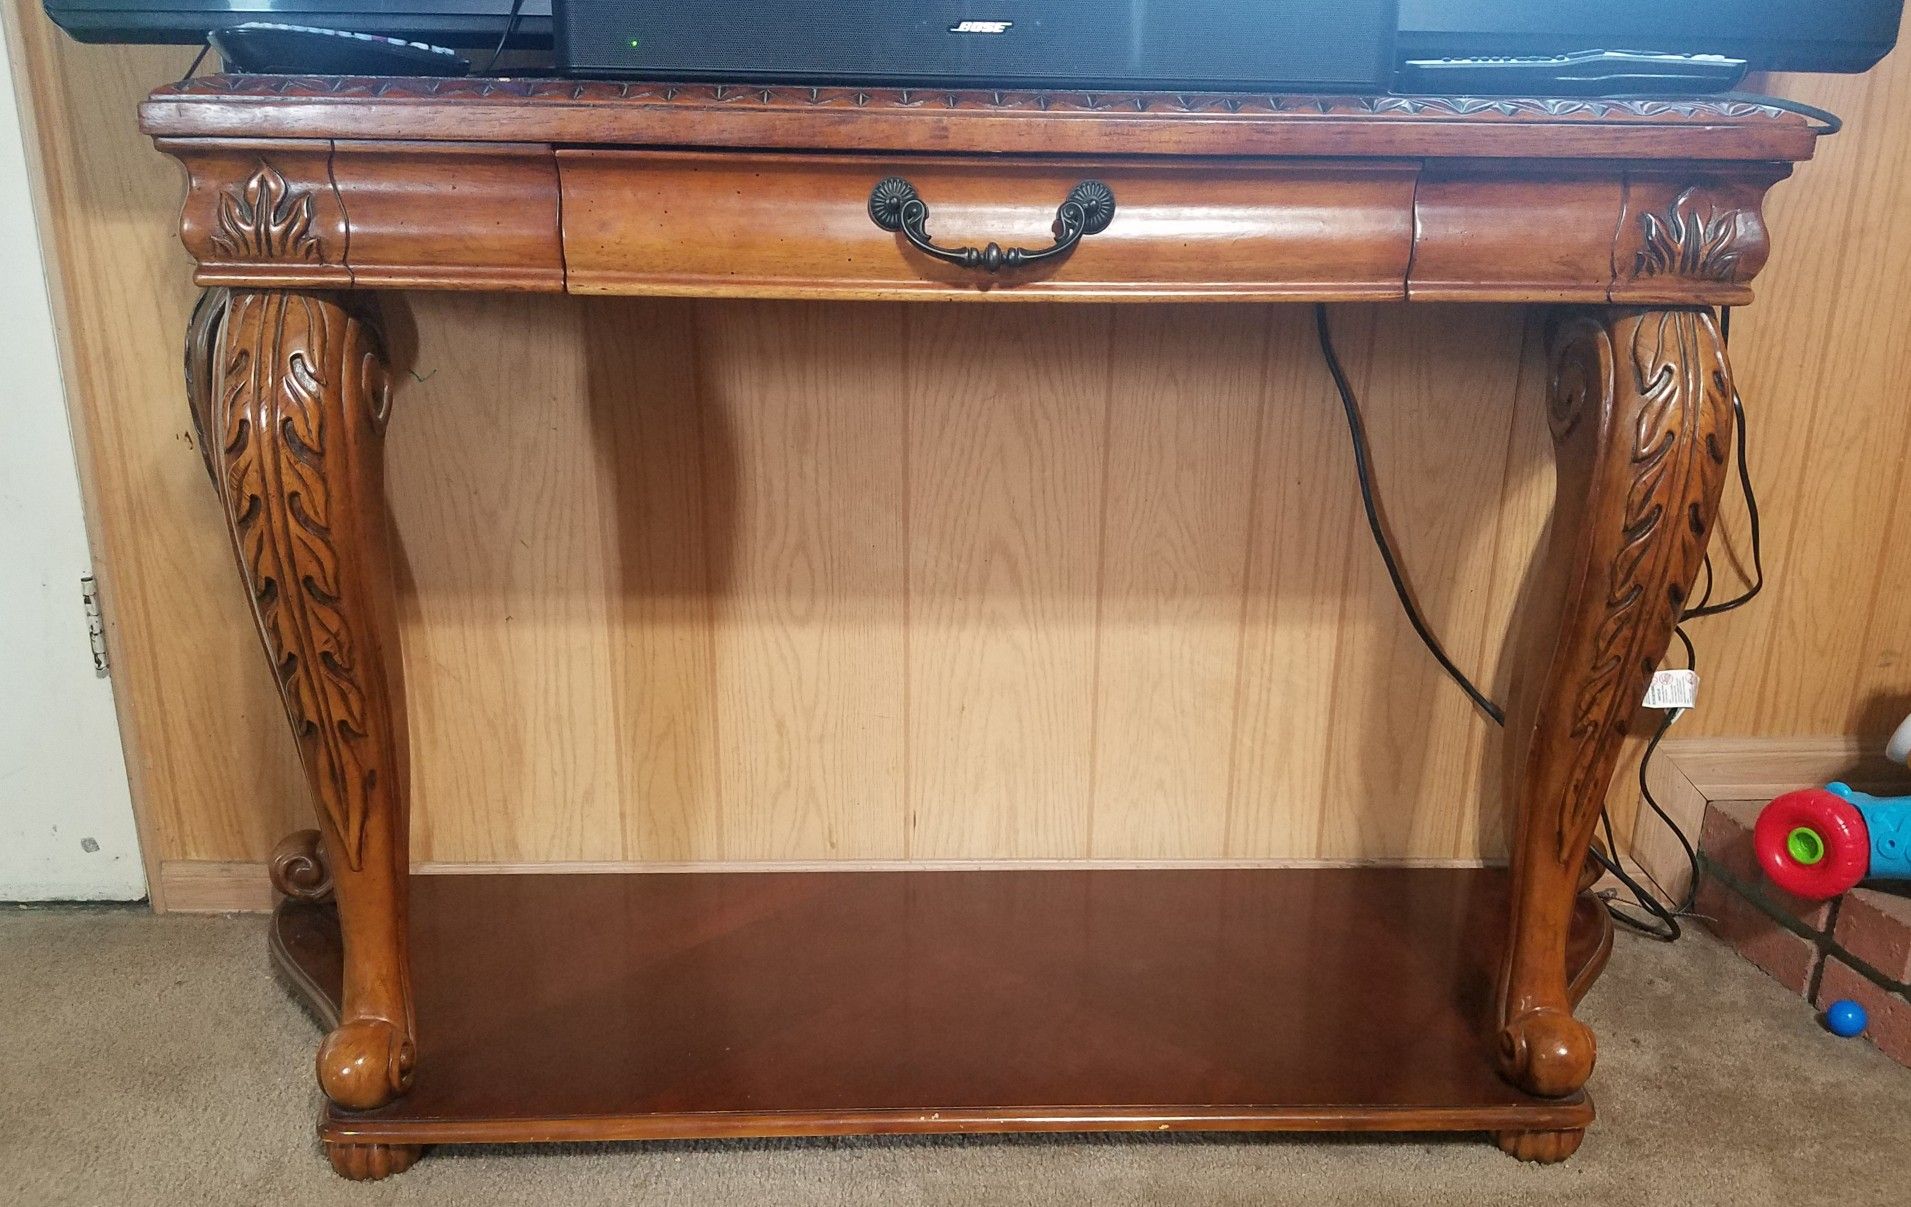 Matching set: coffee table/tv stand